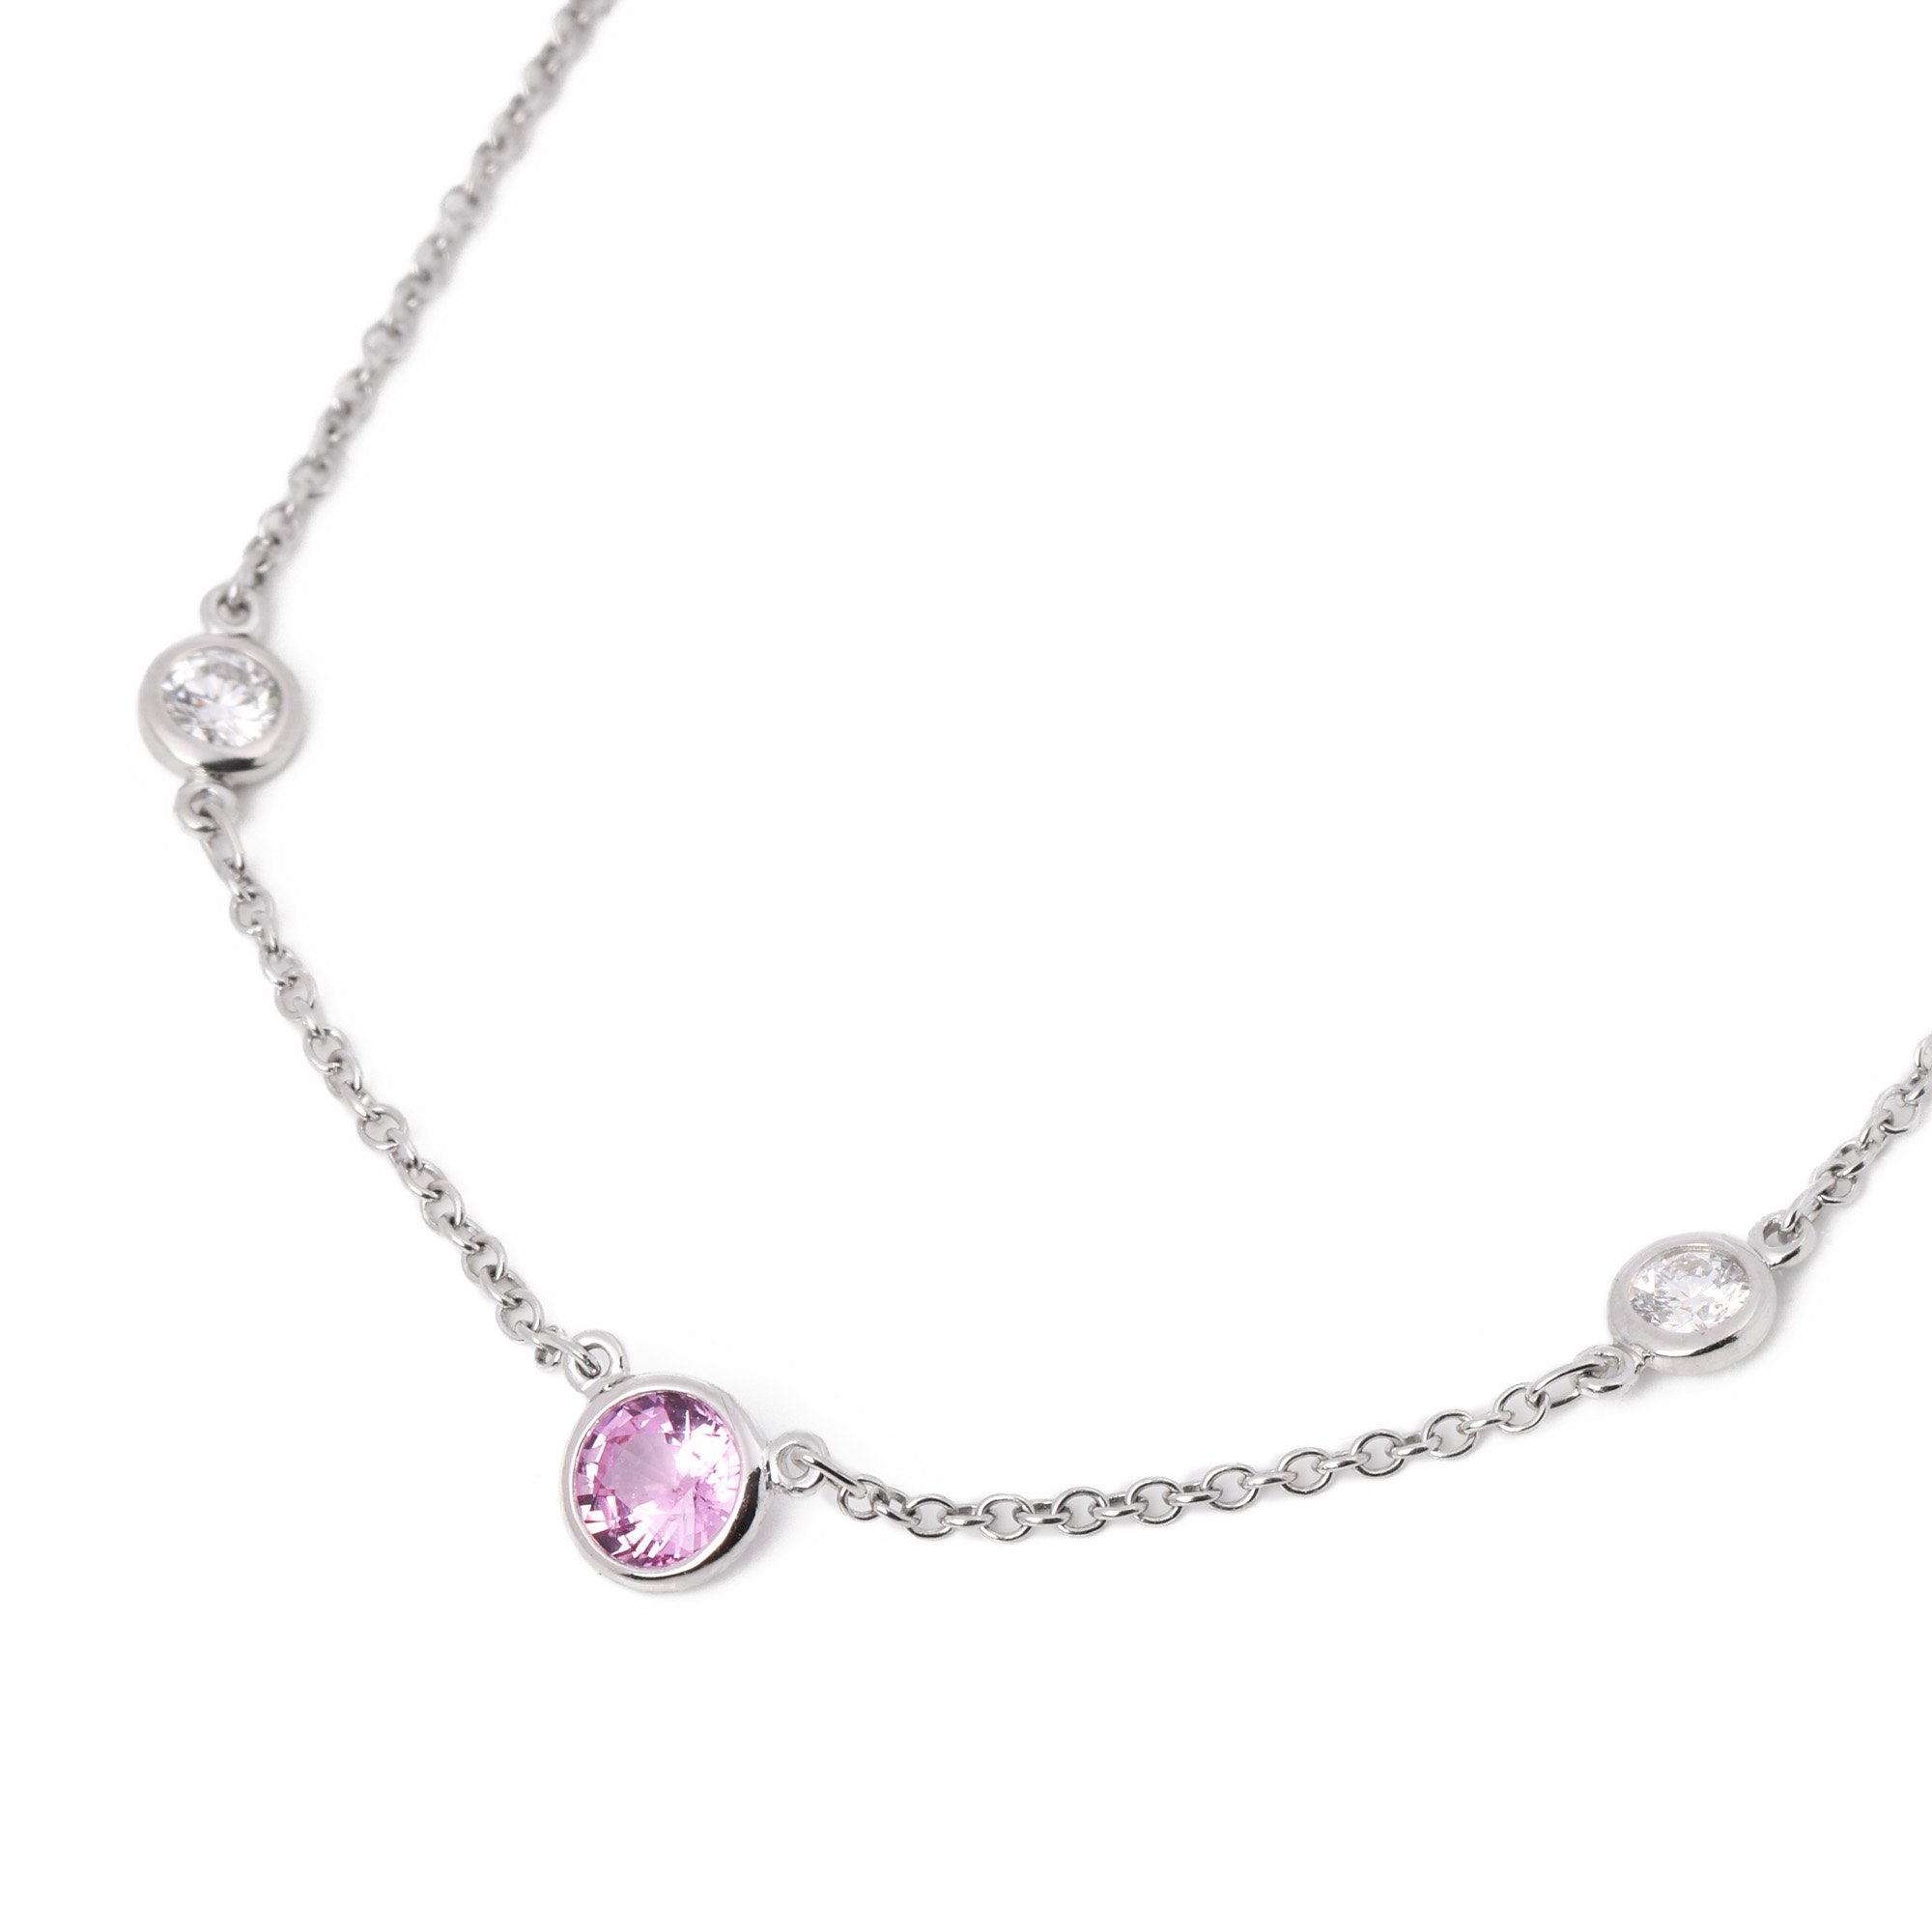 Tiffany & Co. Colours by the Yard Pink Sapphire and Diamond Necklace